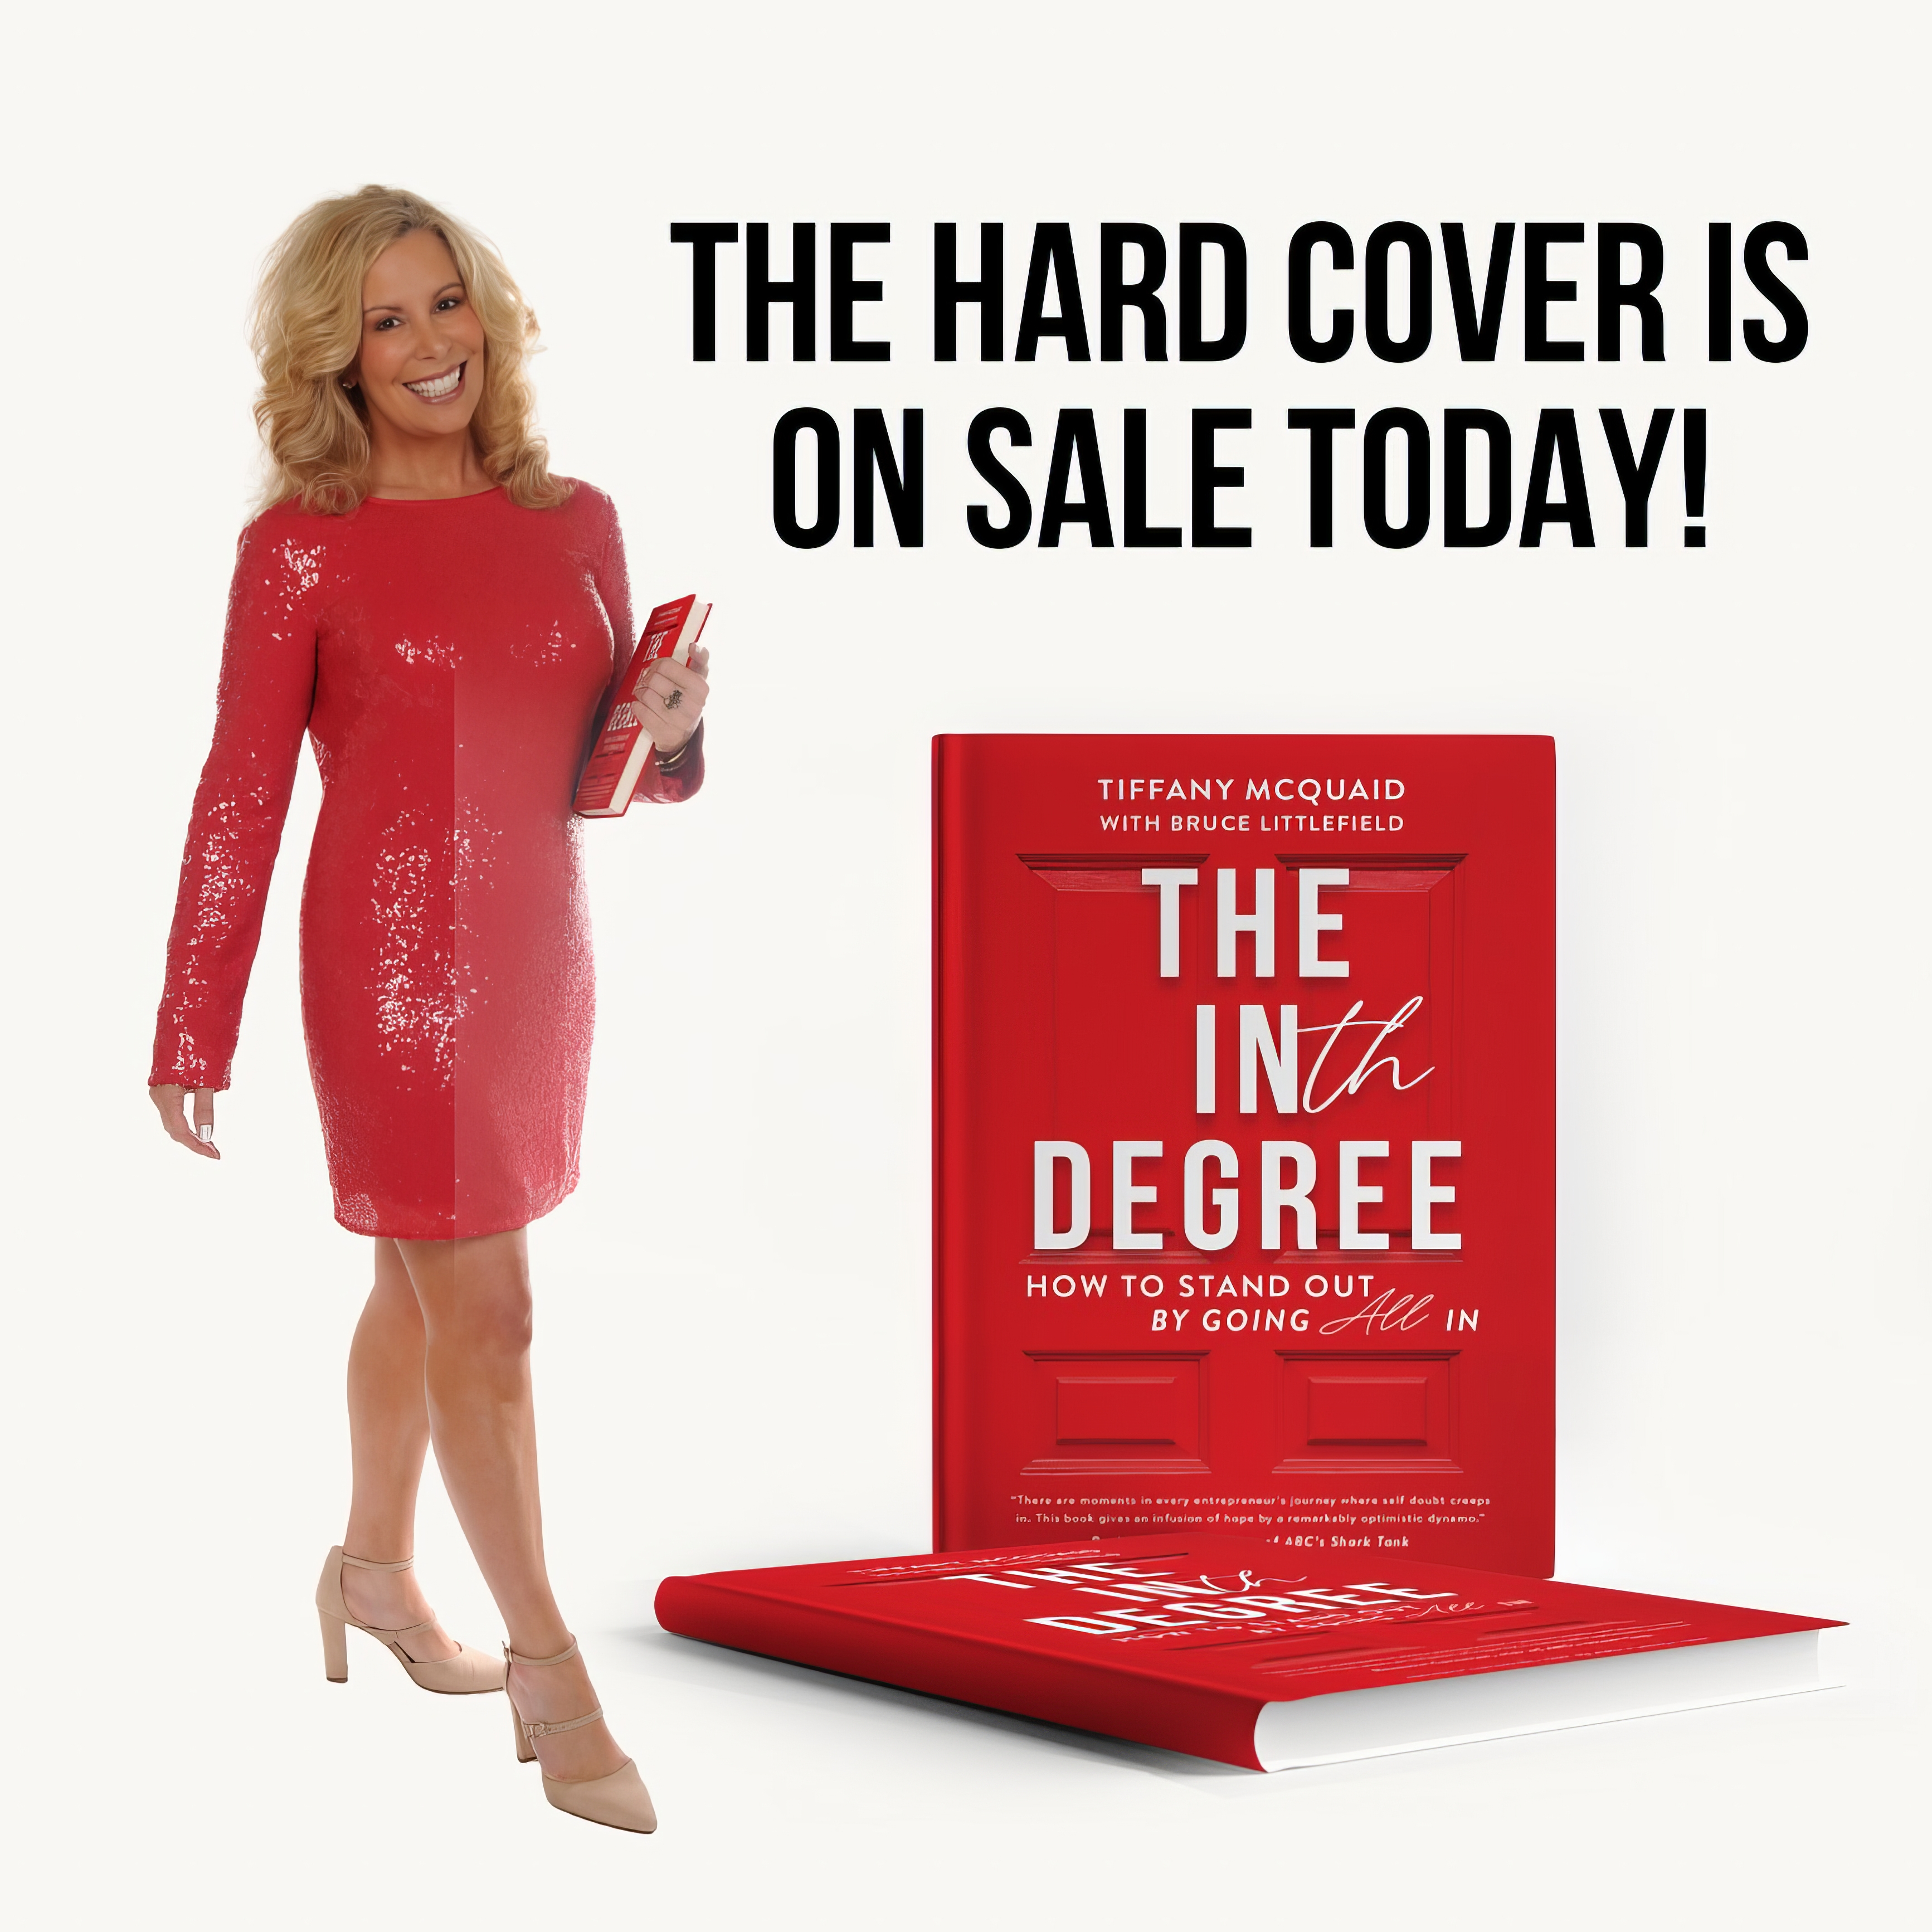 Local entrepreneur collaborates on first book, ‘The INth Degree’